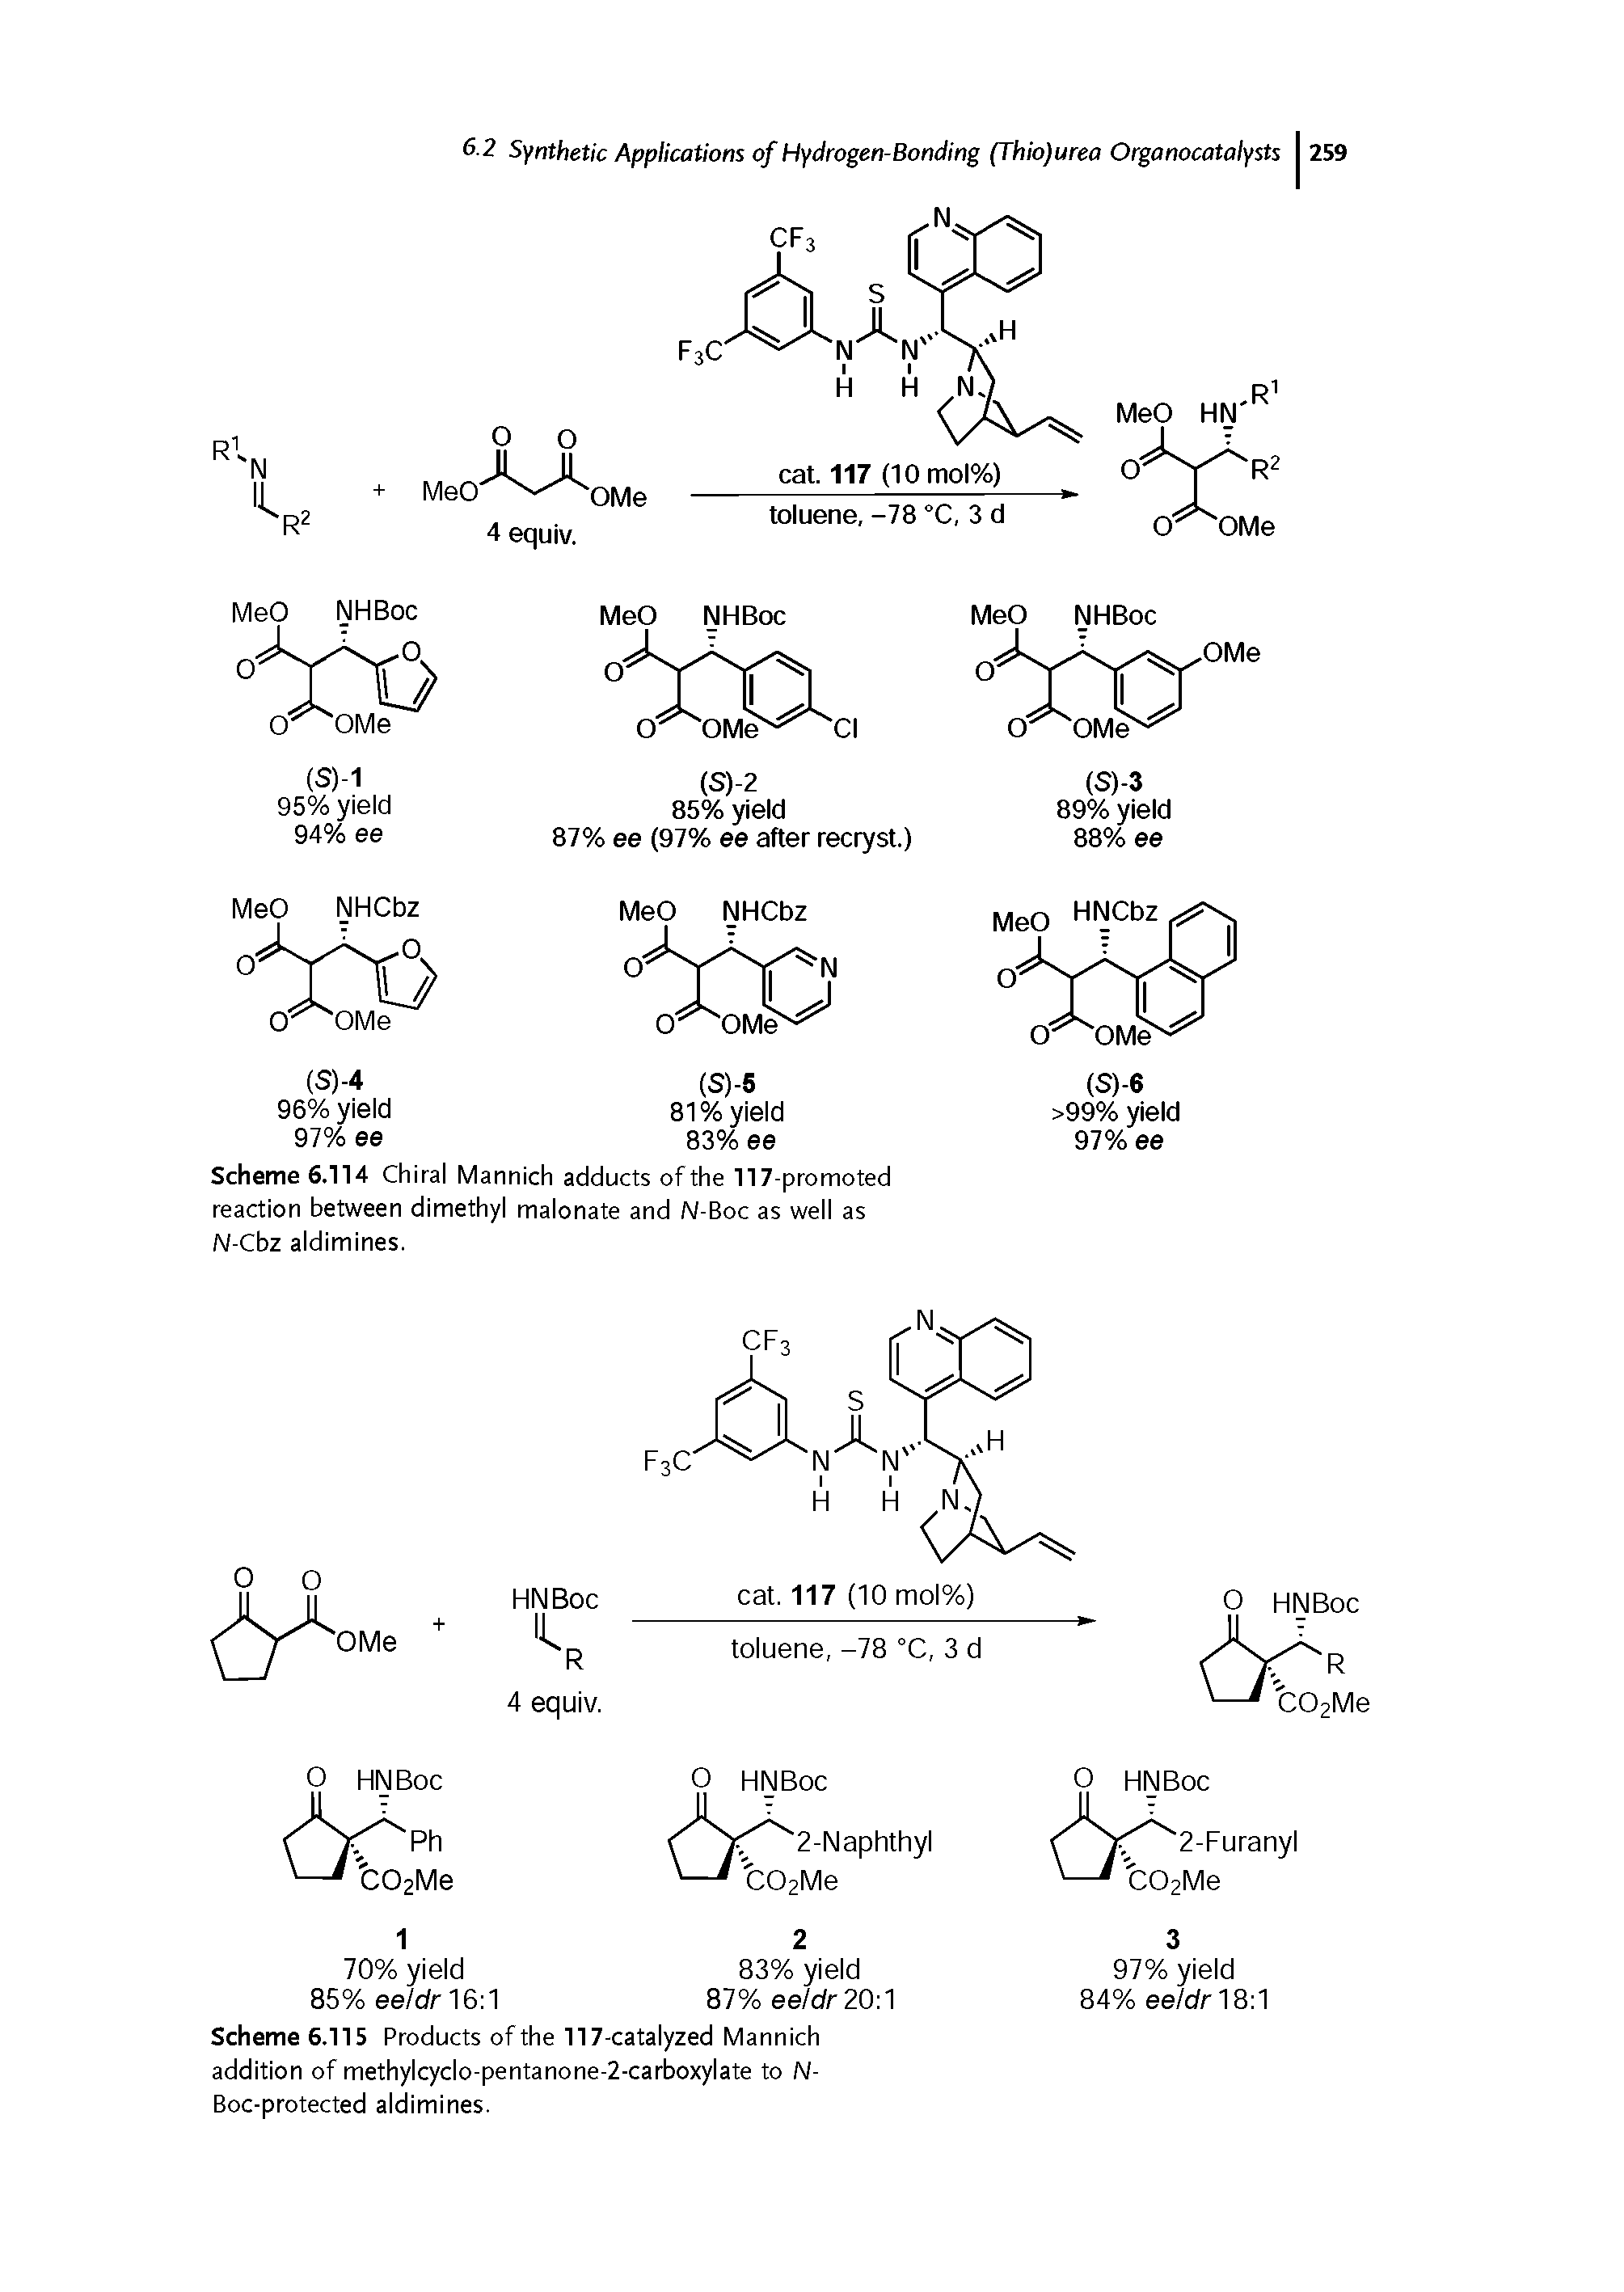 Scheme 6.114 Chiral Mannich adducts of the 117-promoted reaction between dimethyl malonate and N-Boc as well as N-Cbz aldimines.